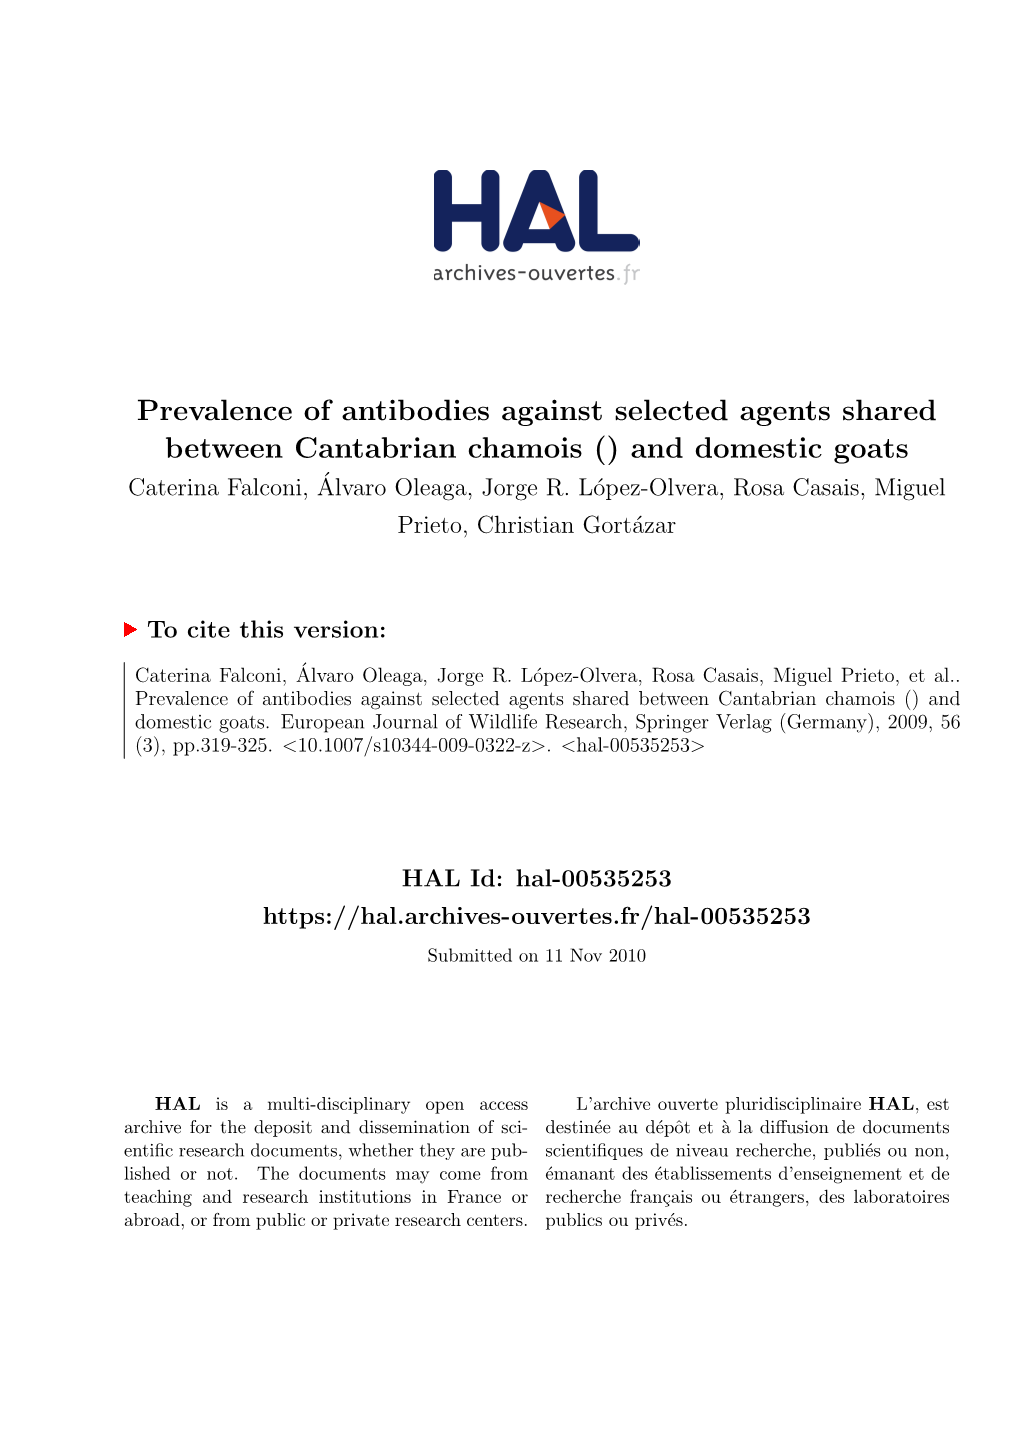 Prevalence of Antibodies Against Selected Agents Shared Between Cantabrian Chamois () and Domestic Goats Caterina Falconi, Alvaro´ Oleaga, Jorge R